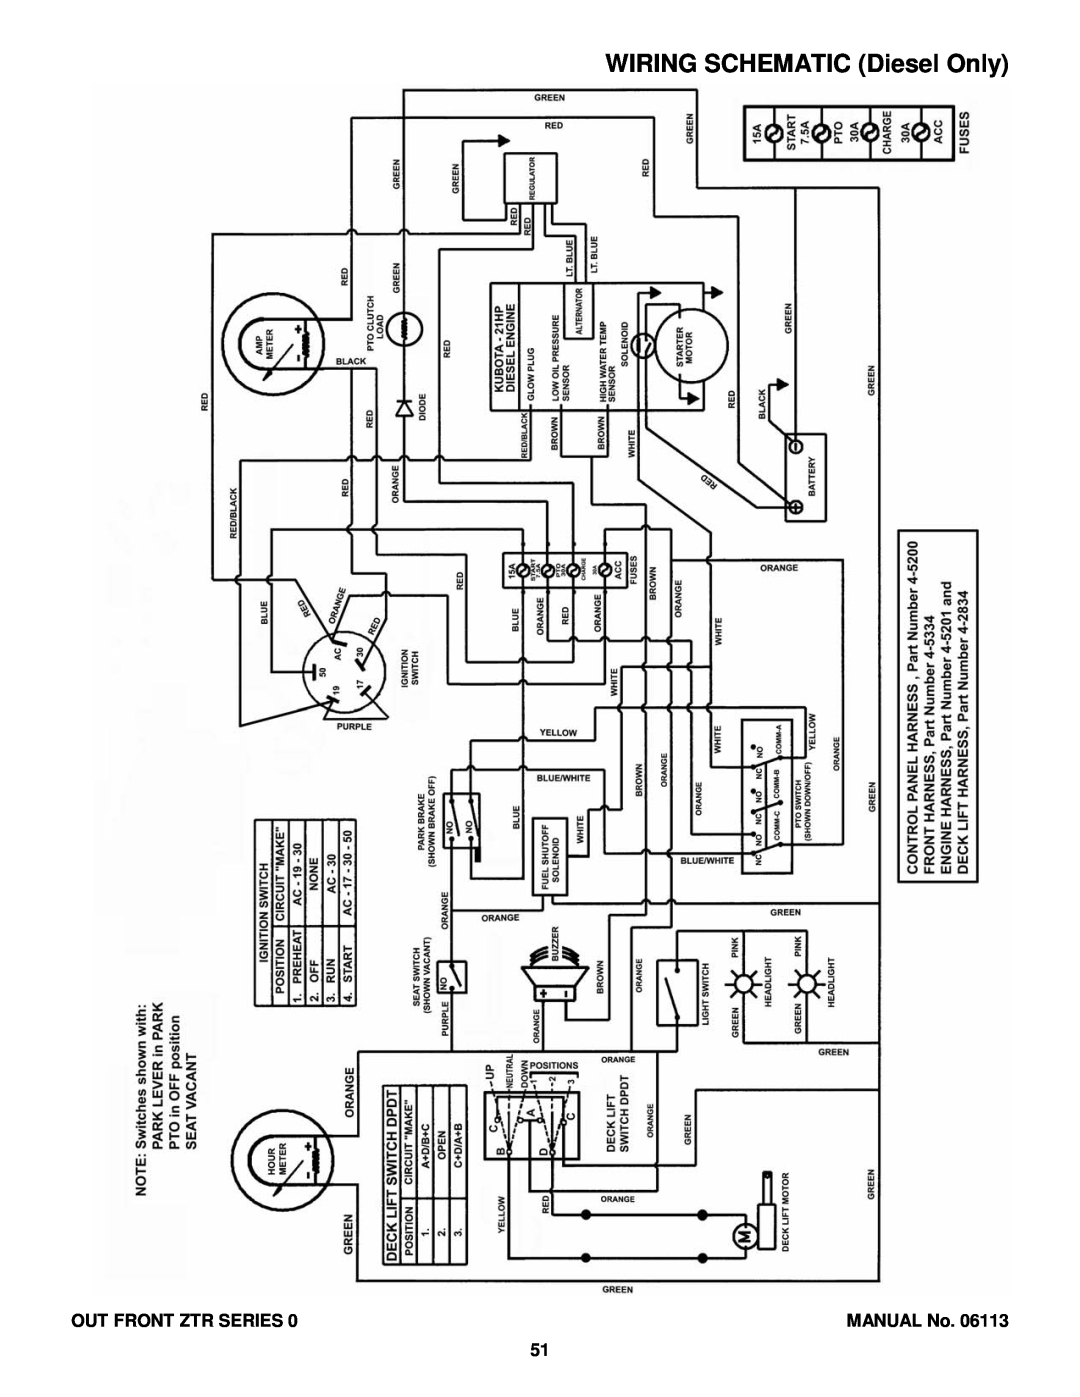 Snapper EZF6100M, EZF5200M, EZF2100DKU, ZF2300GKU manual WIRING SCHEMATIC Diesel Only, Out Front Ztr Series, MANUAL No 